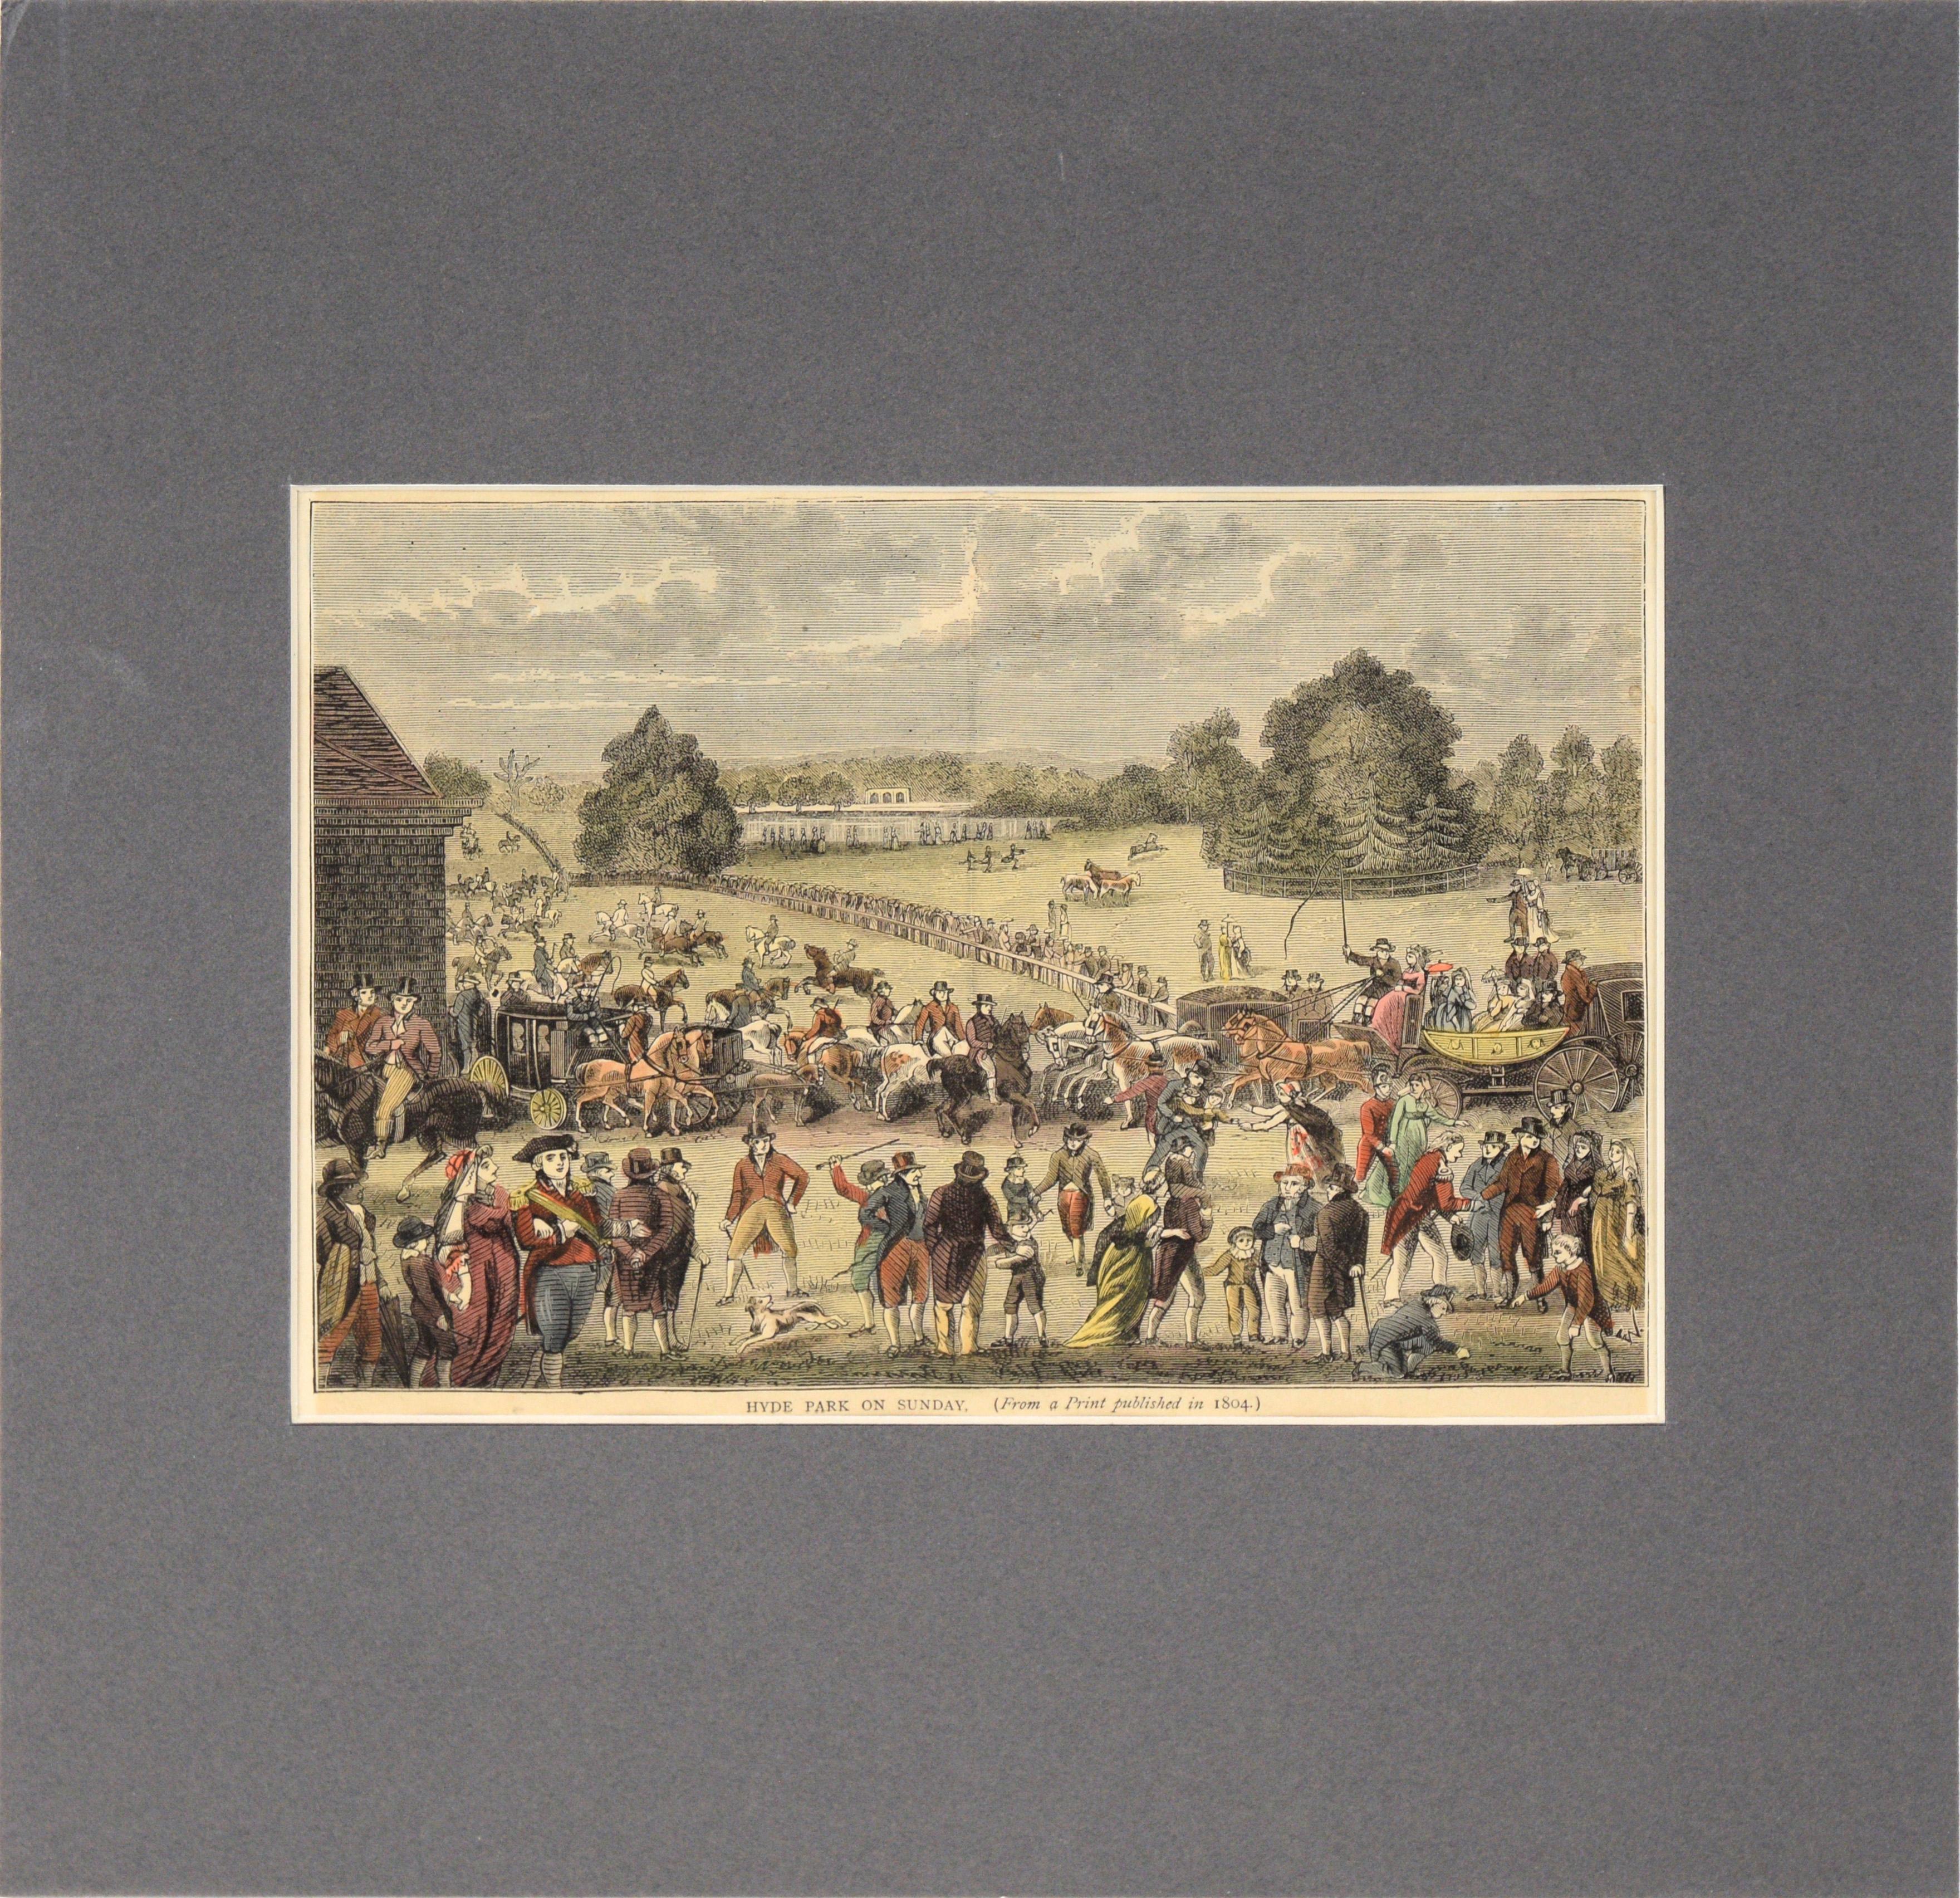 Edward Pugh Figurative Print - "Hyde Park on Sunday" - Hand Colored Etching from "Old and New London"